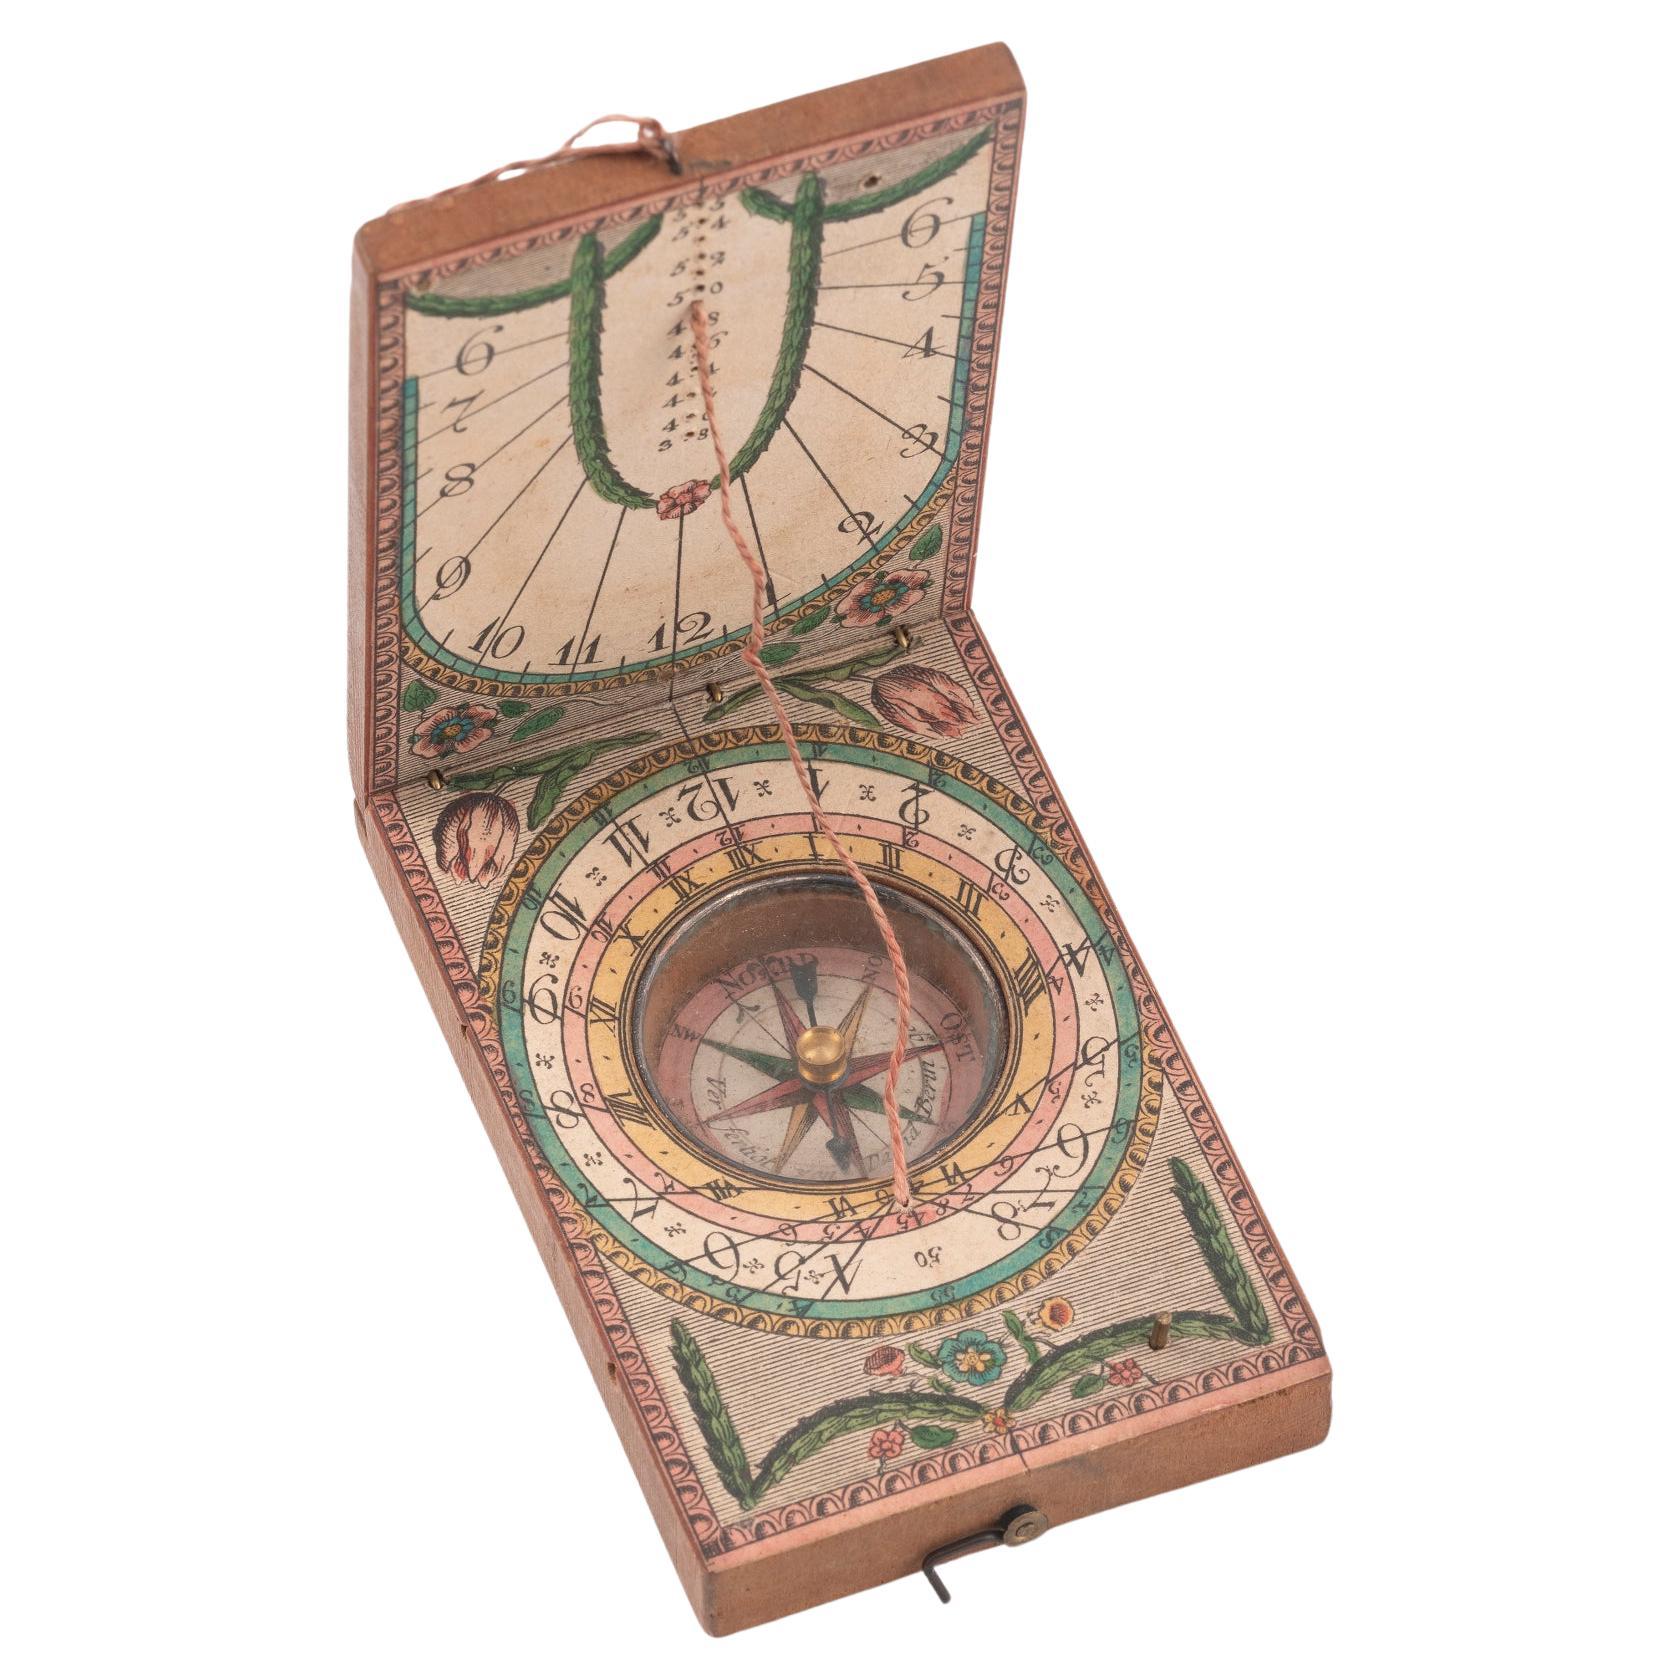 SHIPPING POLICY:
No additional costs will be added to this order.
Shipping costs will be totally covered by the seller (customs duties included). 

Pocket sundial, made out of wood, with print paper element on both the internal sides and to the top.